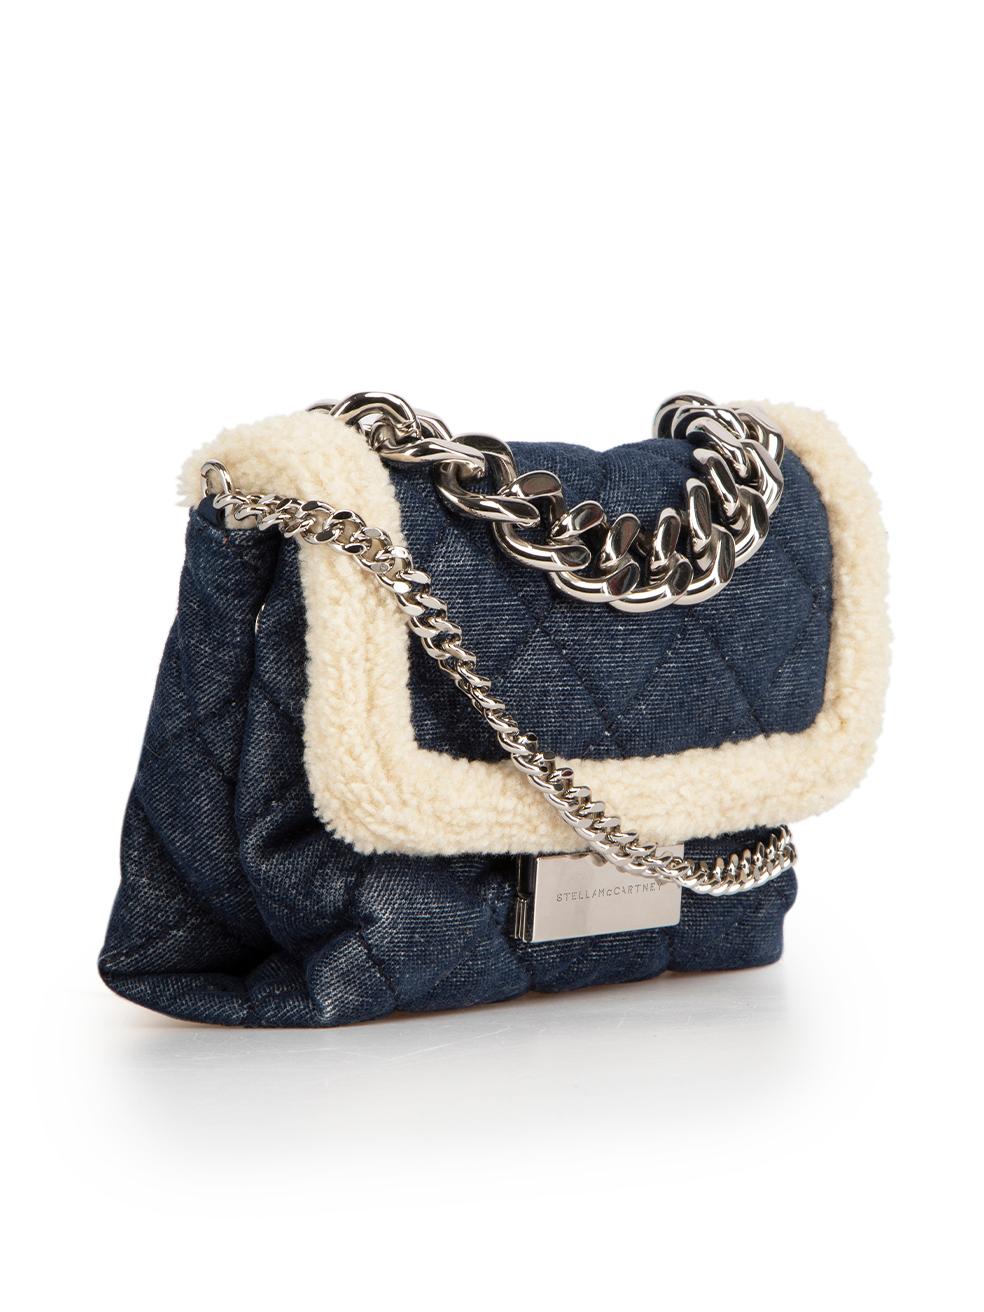 CONDITION is Never worn. No visible wear to bag is evident on this new Stella McCartney designer resale item. Comes with original box and dust-bag.
 
 Details
 Navy
 Denim
 Mini crossbody bag
 Quilted
 Silver tone hardware
 Flap with clasp